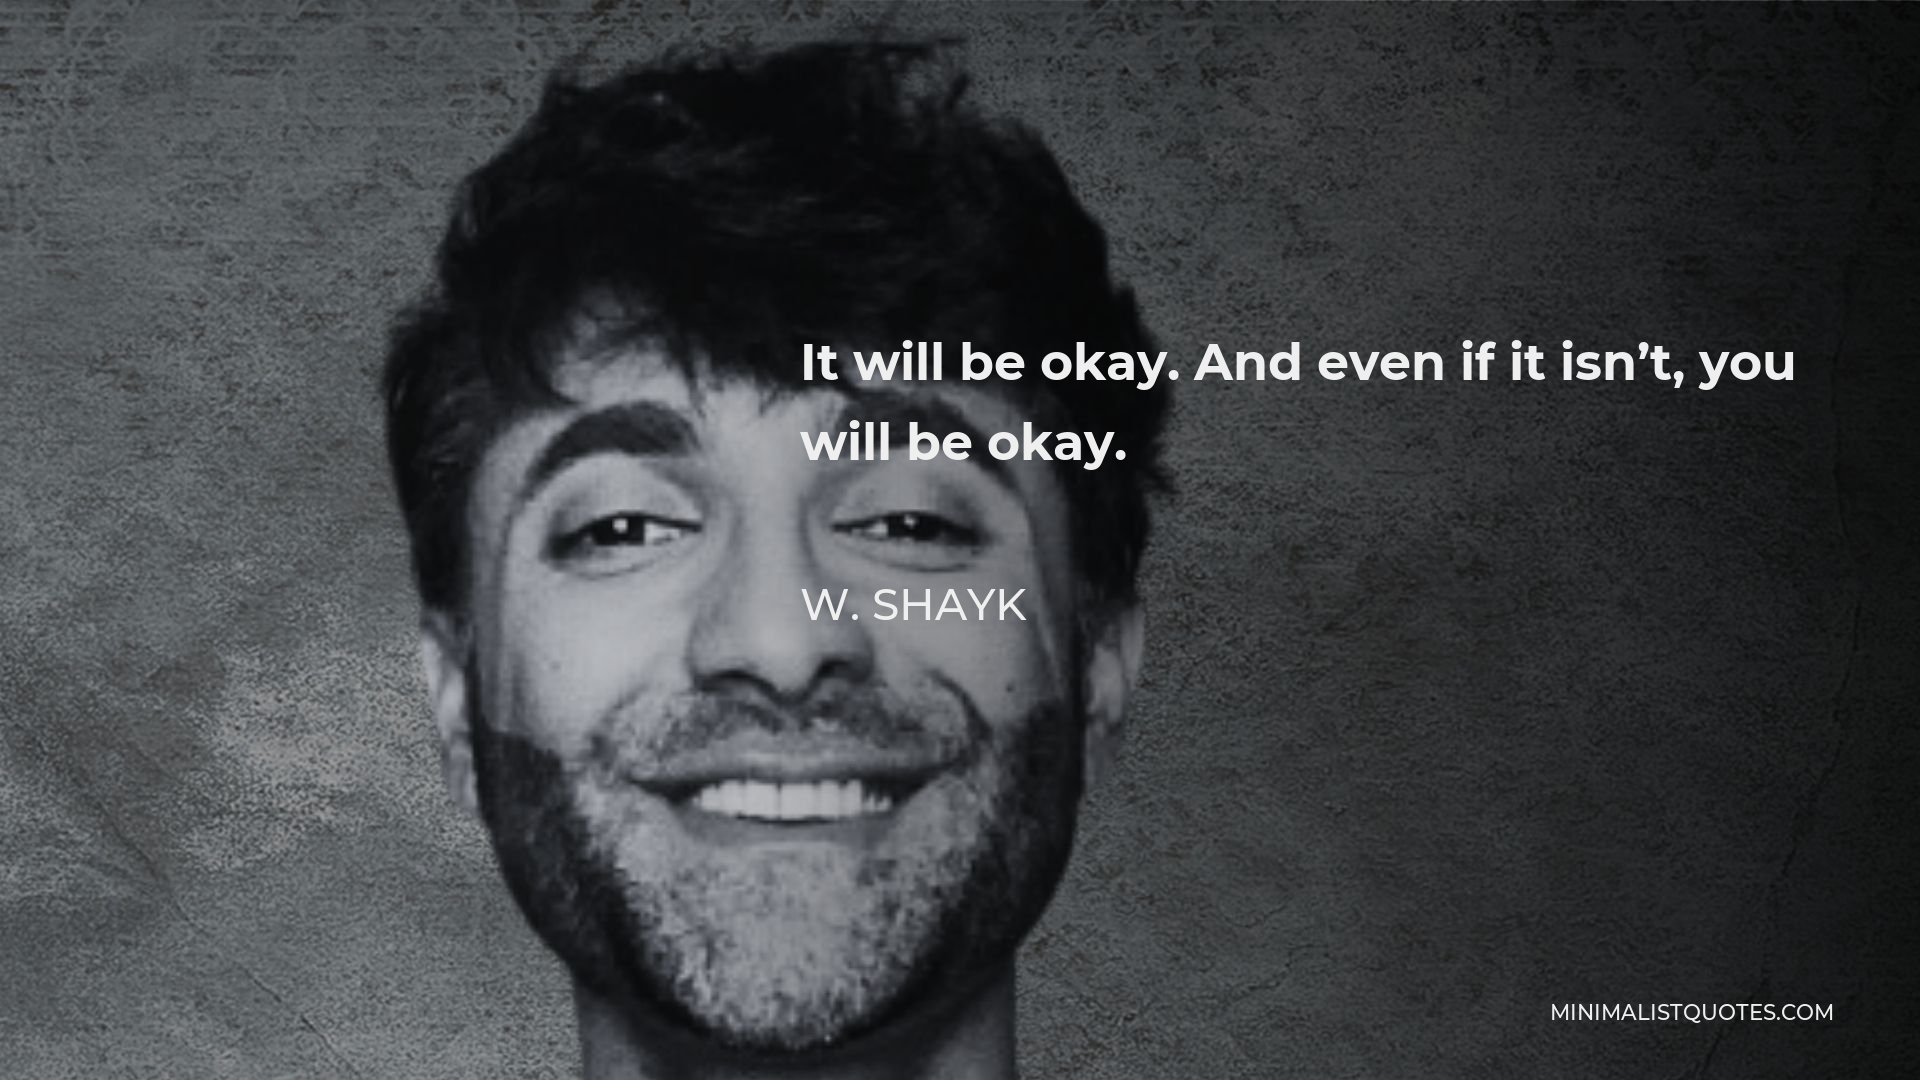 W. Shayk Quote - It will be okay. And even if it isn’t, you will be okay.